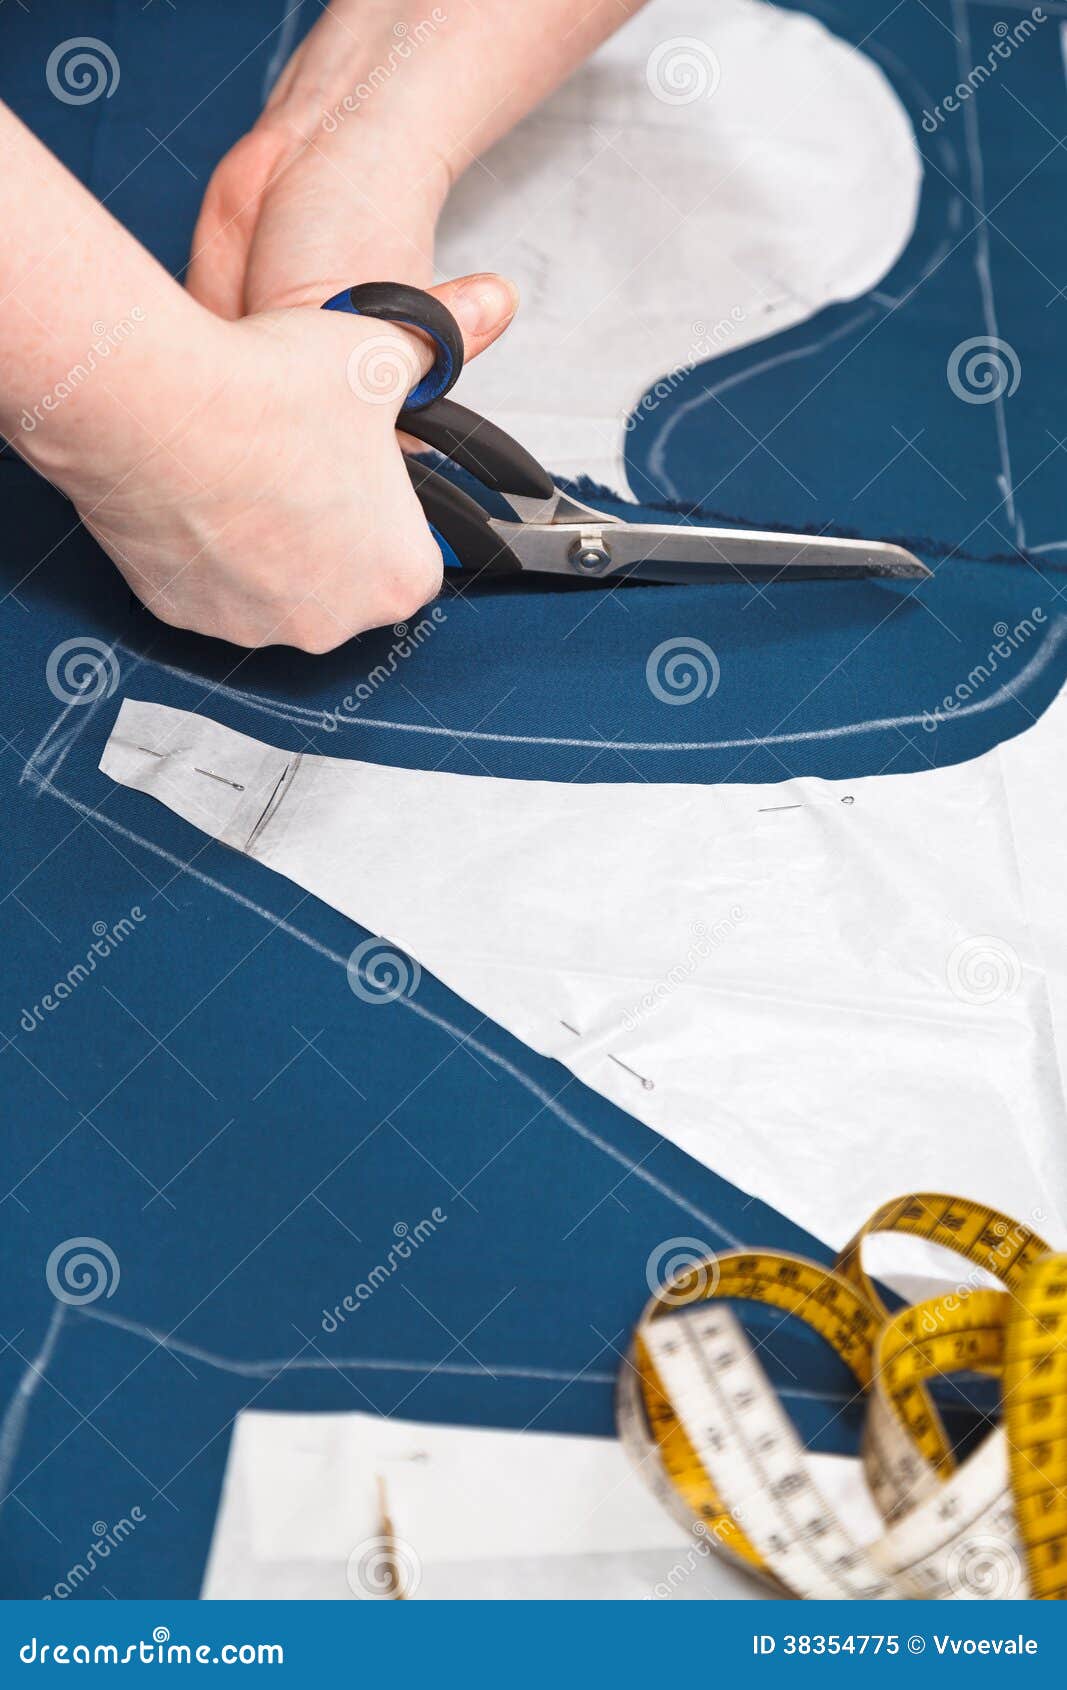 fitter cuts out dress according with pattern